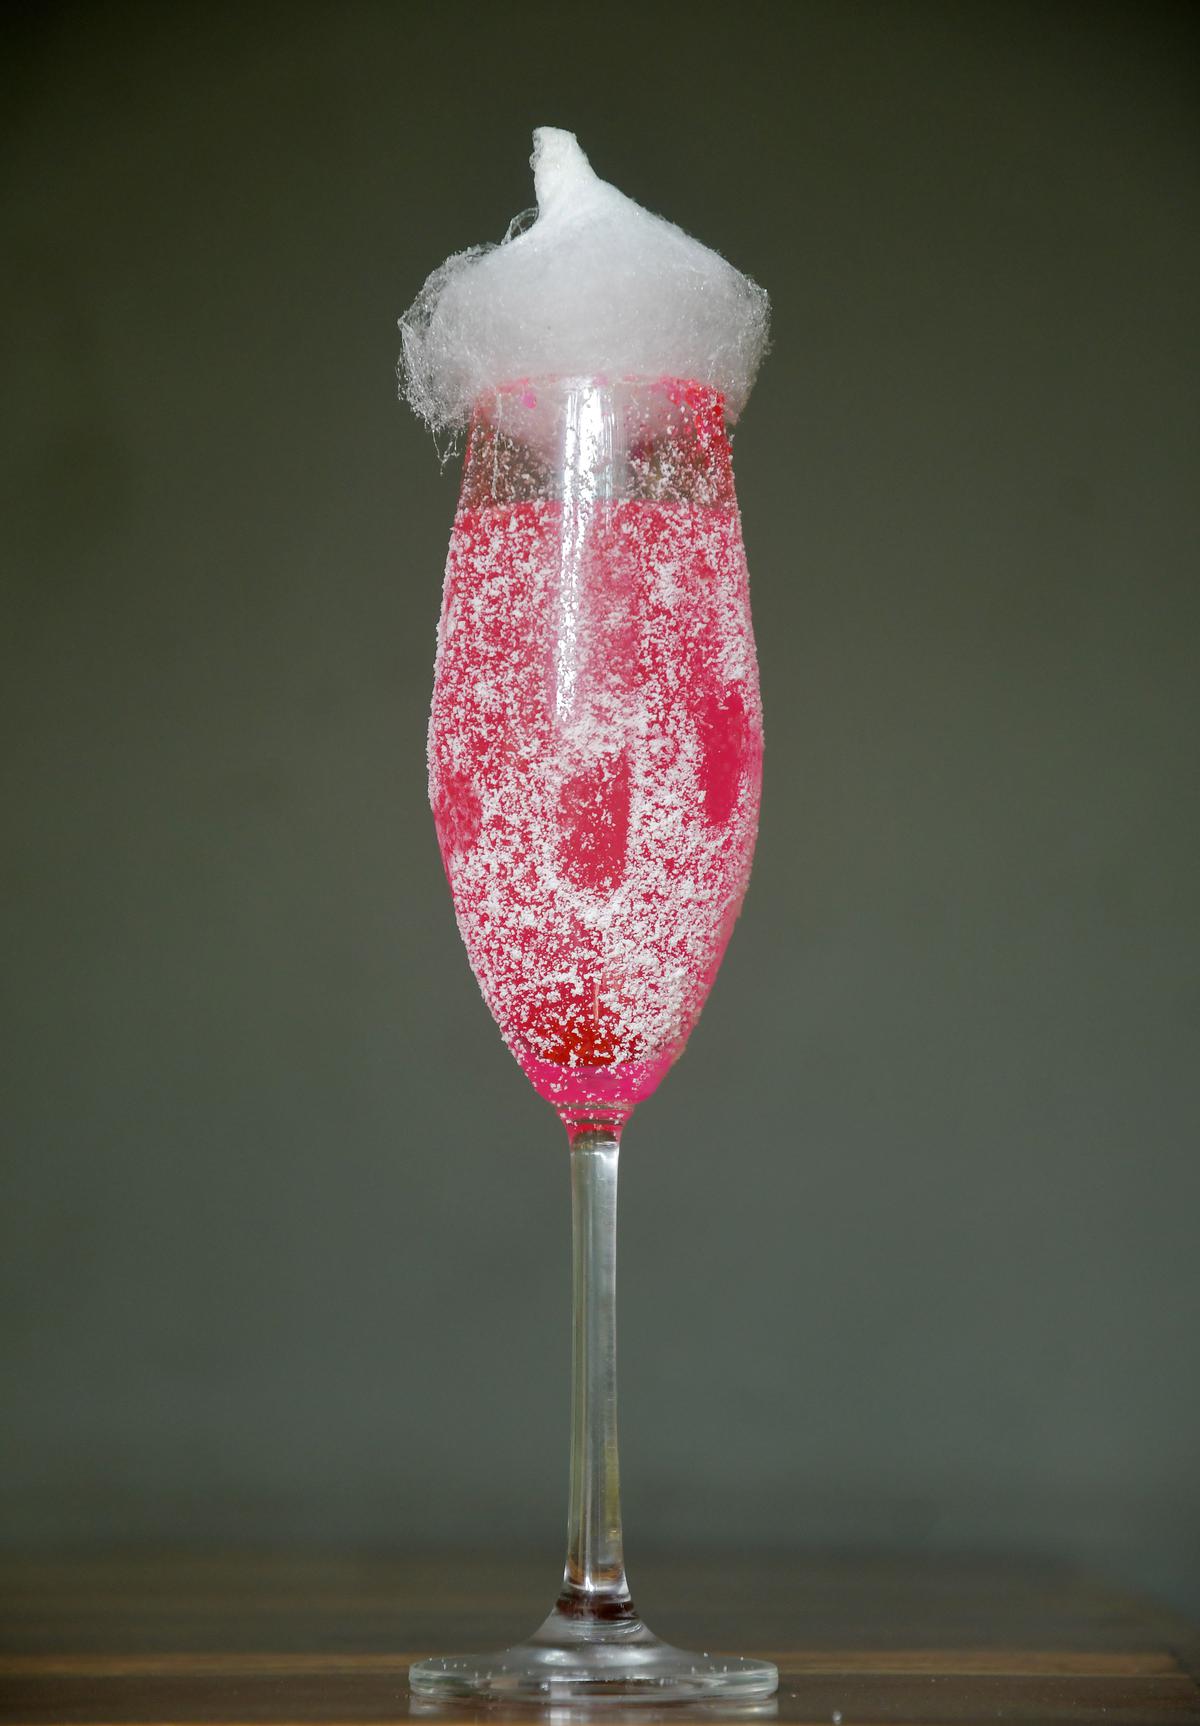 A cotton candy-topped cocktail at The Void, Anna Nagar, in Chennai